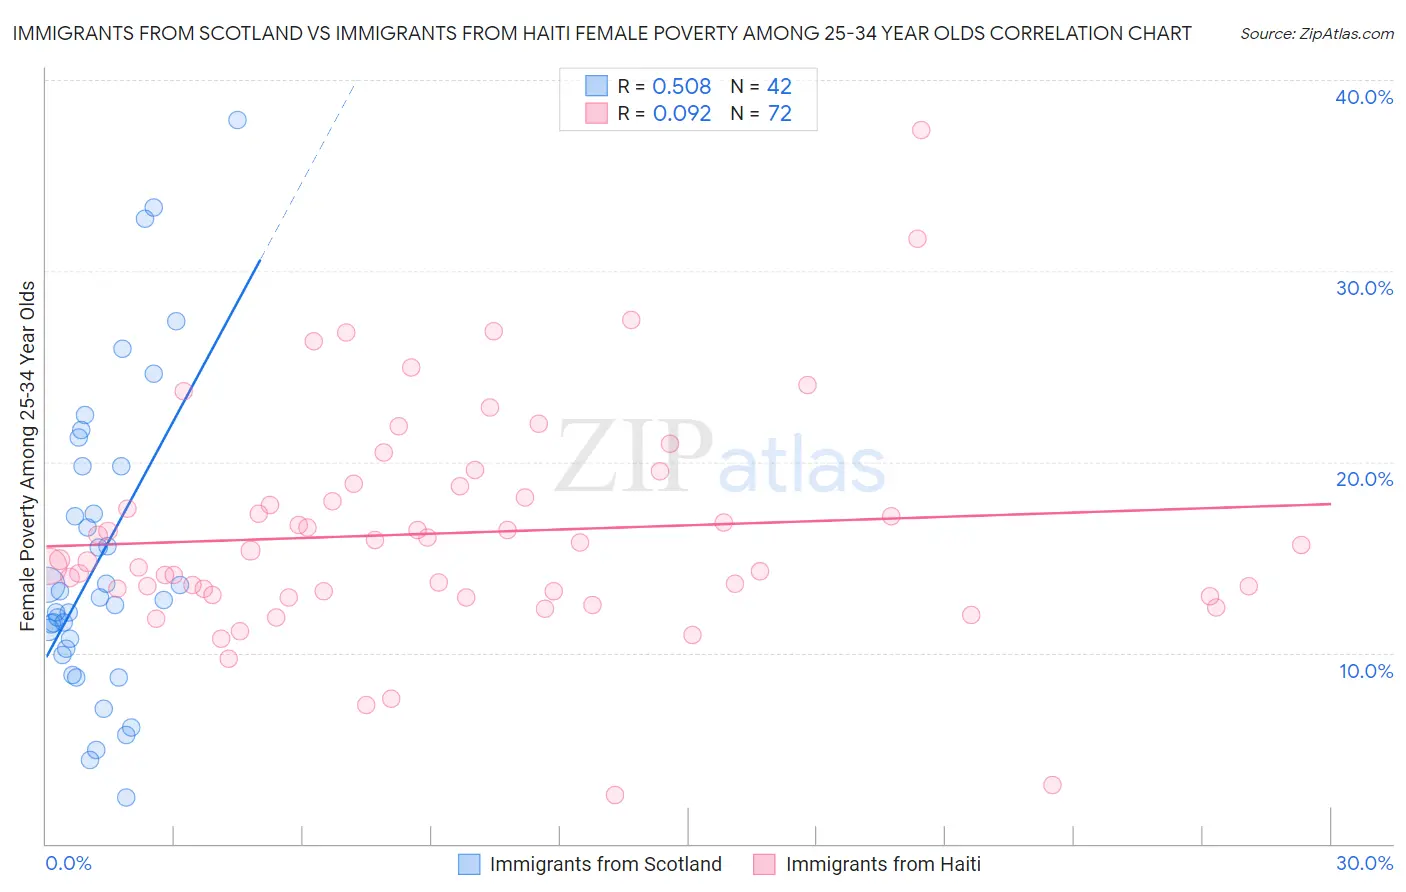 Immigrants from Scotland vs Immigrants from Haiti Female Poverty Among 25-34 Year Olds